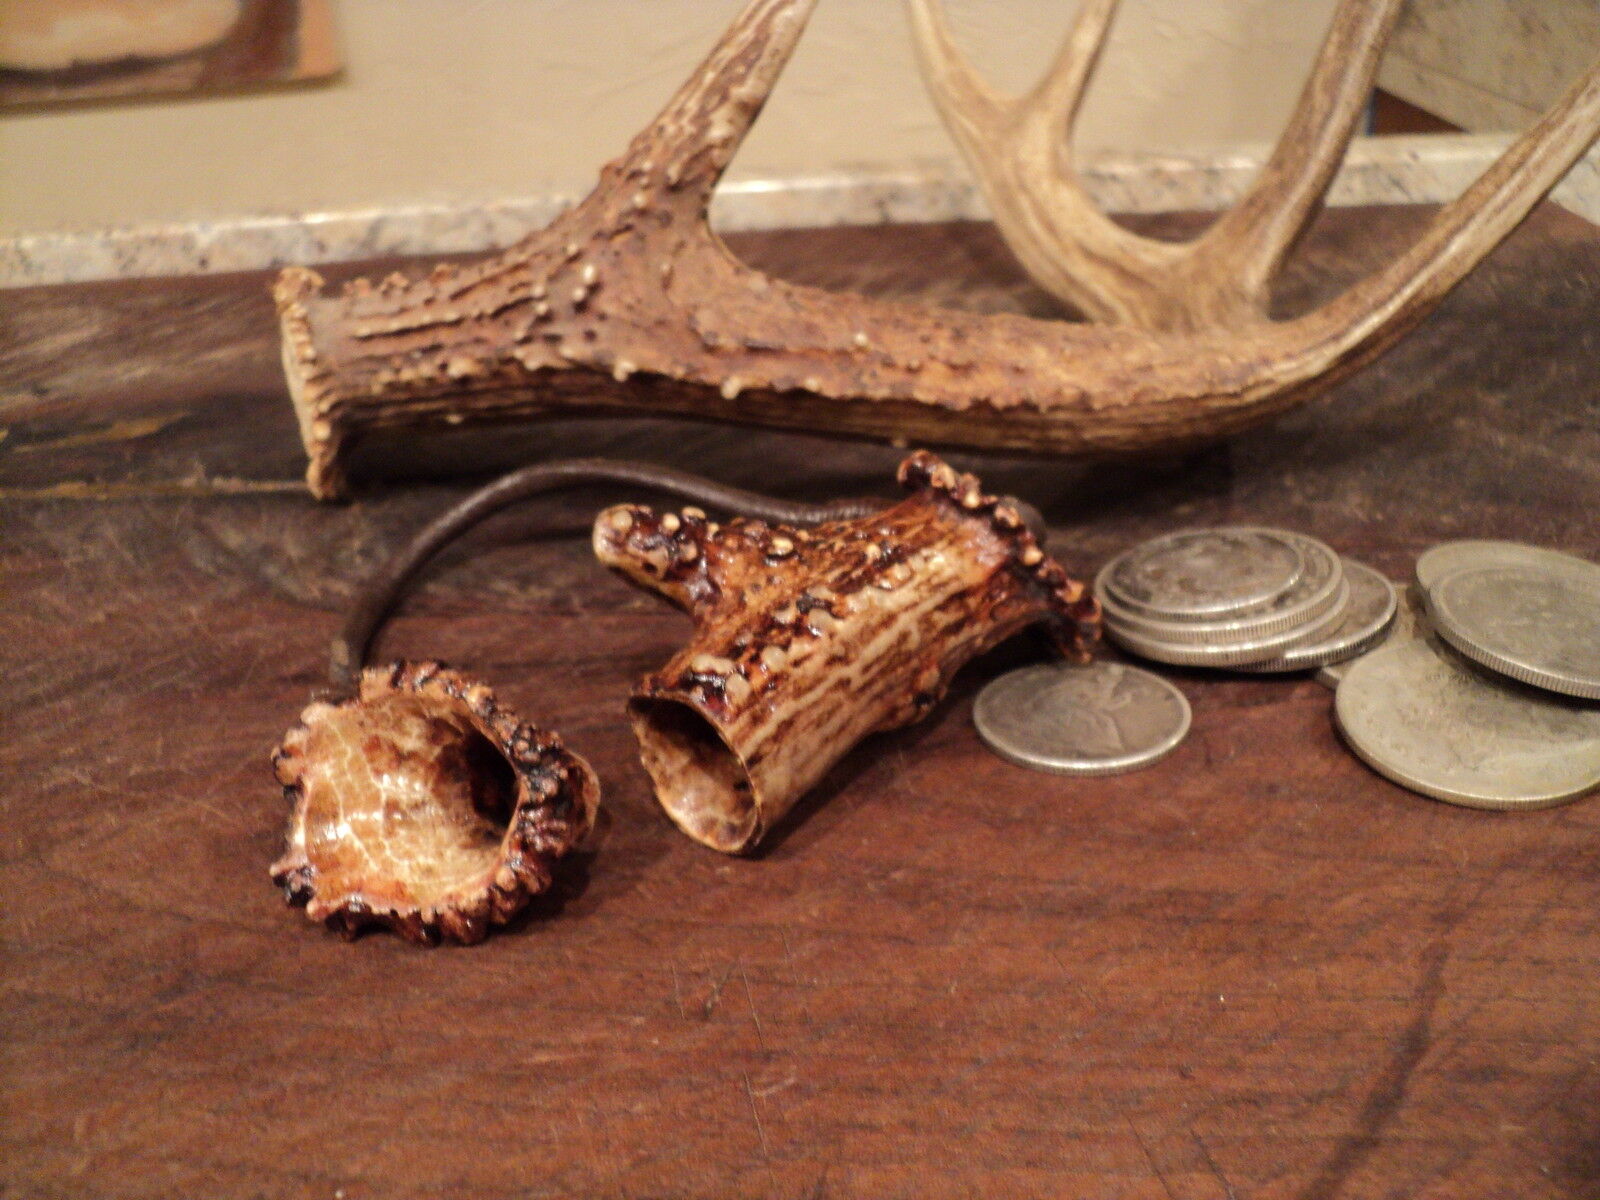 Custom Made to Order Carved Antler Powder Measure with Funnel   Muzzleloading